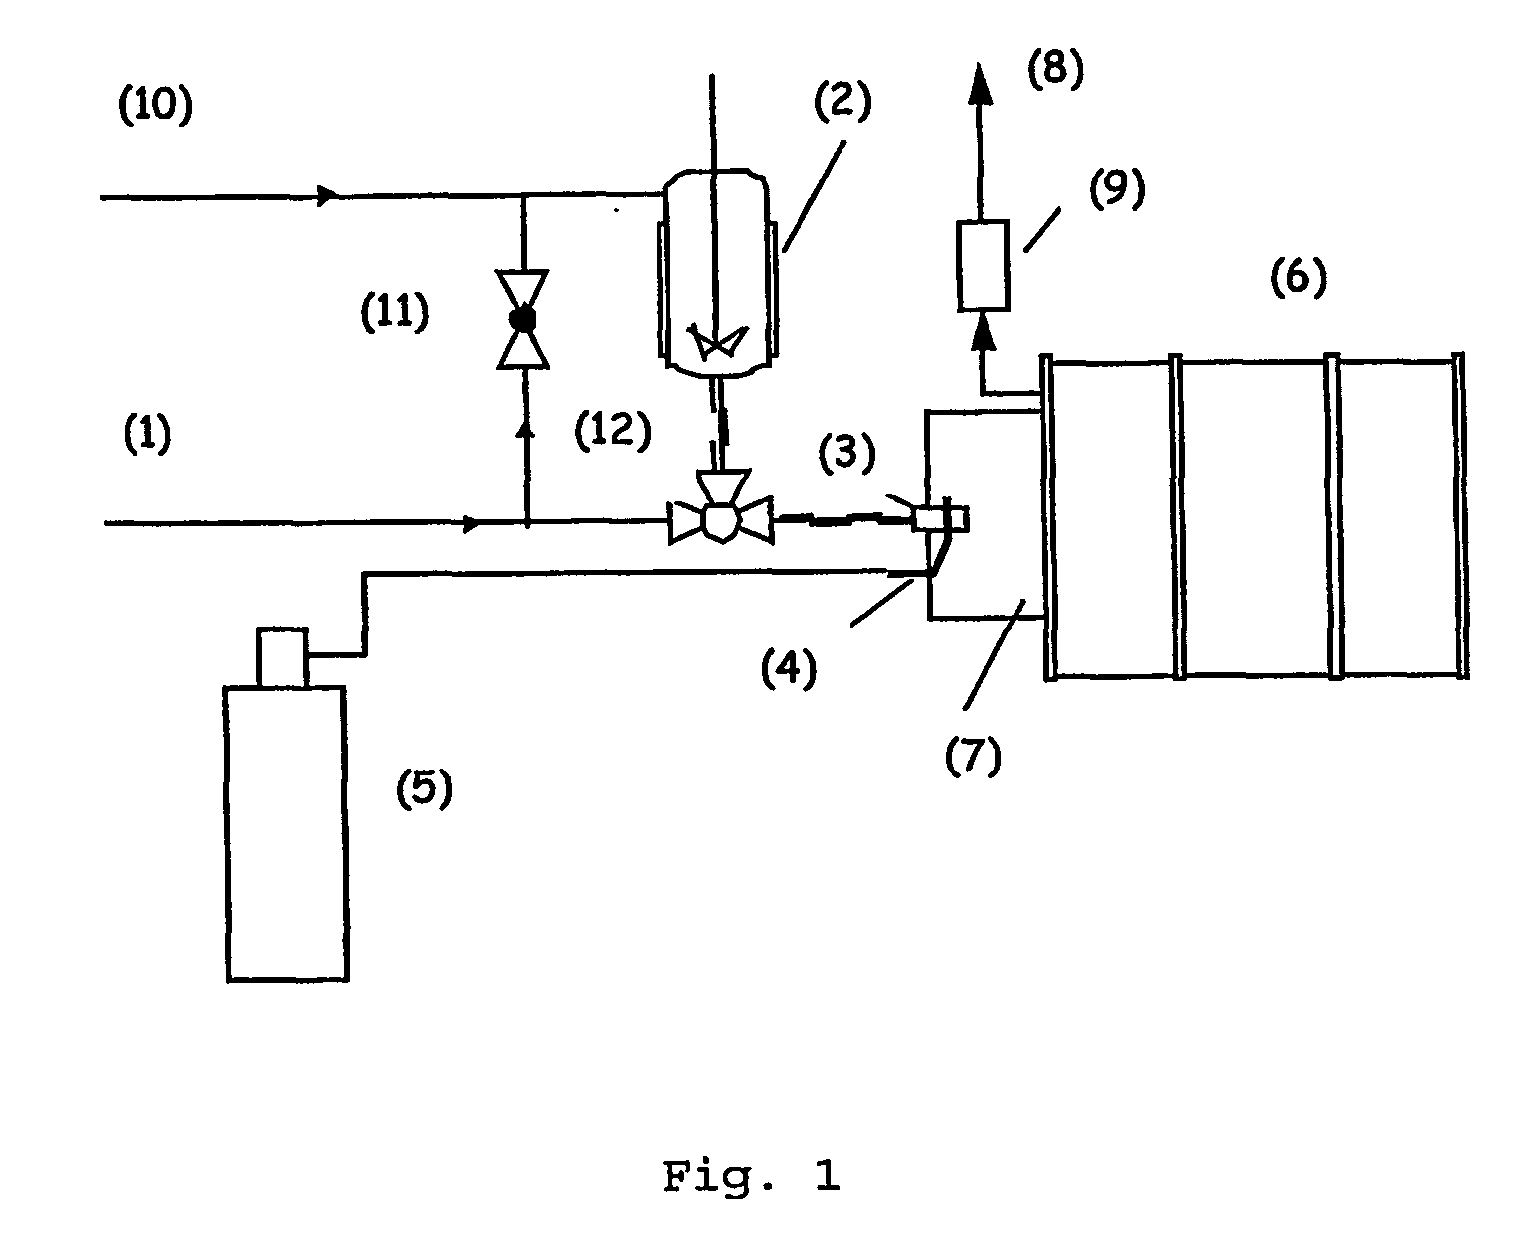 Process for the Preparation of an Edible Dispersion Comprising Oil and Structuring Agent